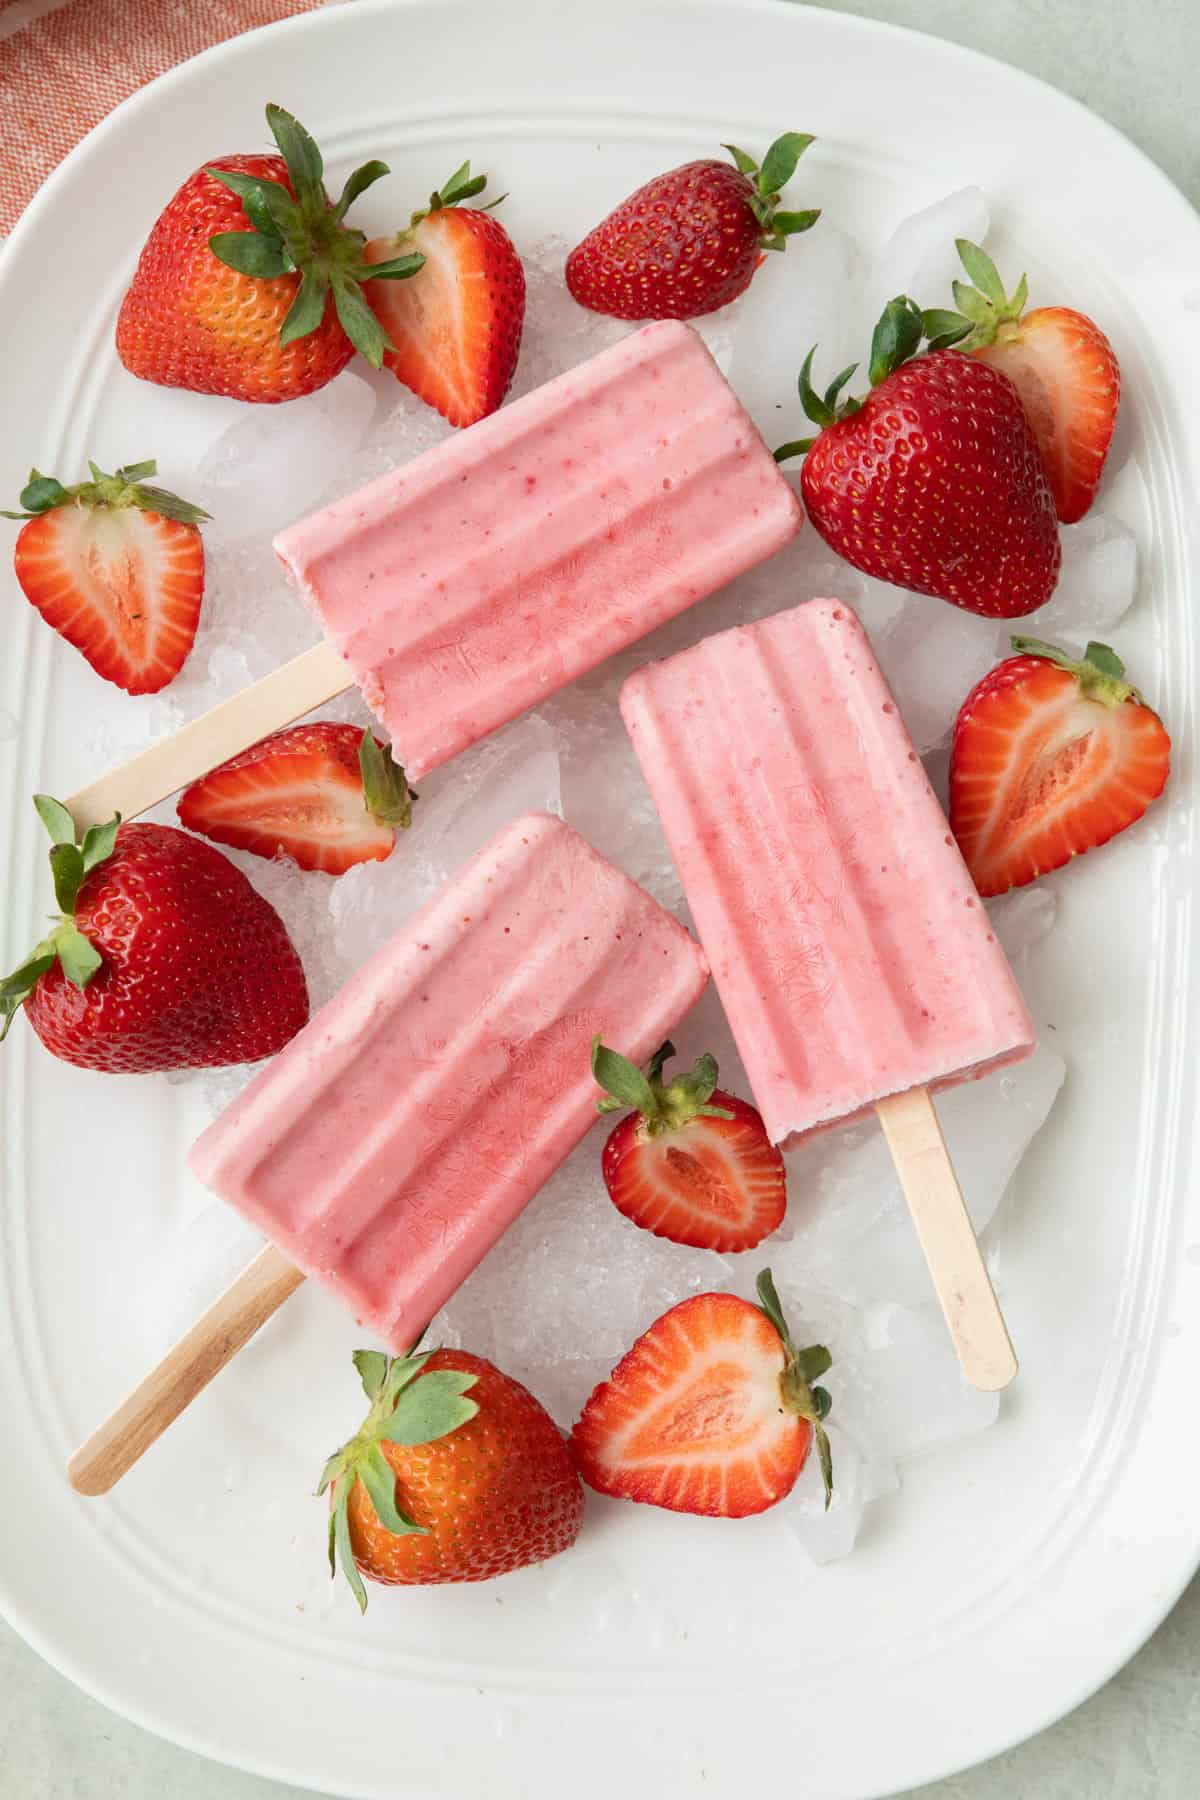 Frozen strawberry yogurt popsicles on a tray of ice with extra strawberries around.